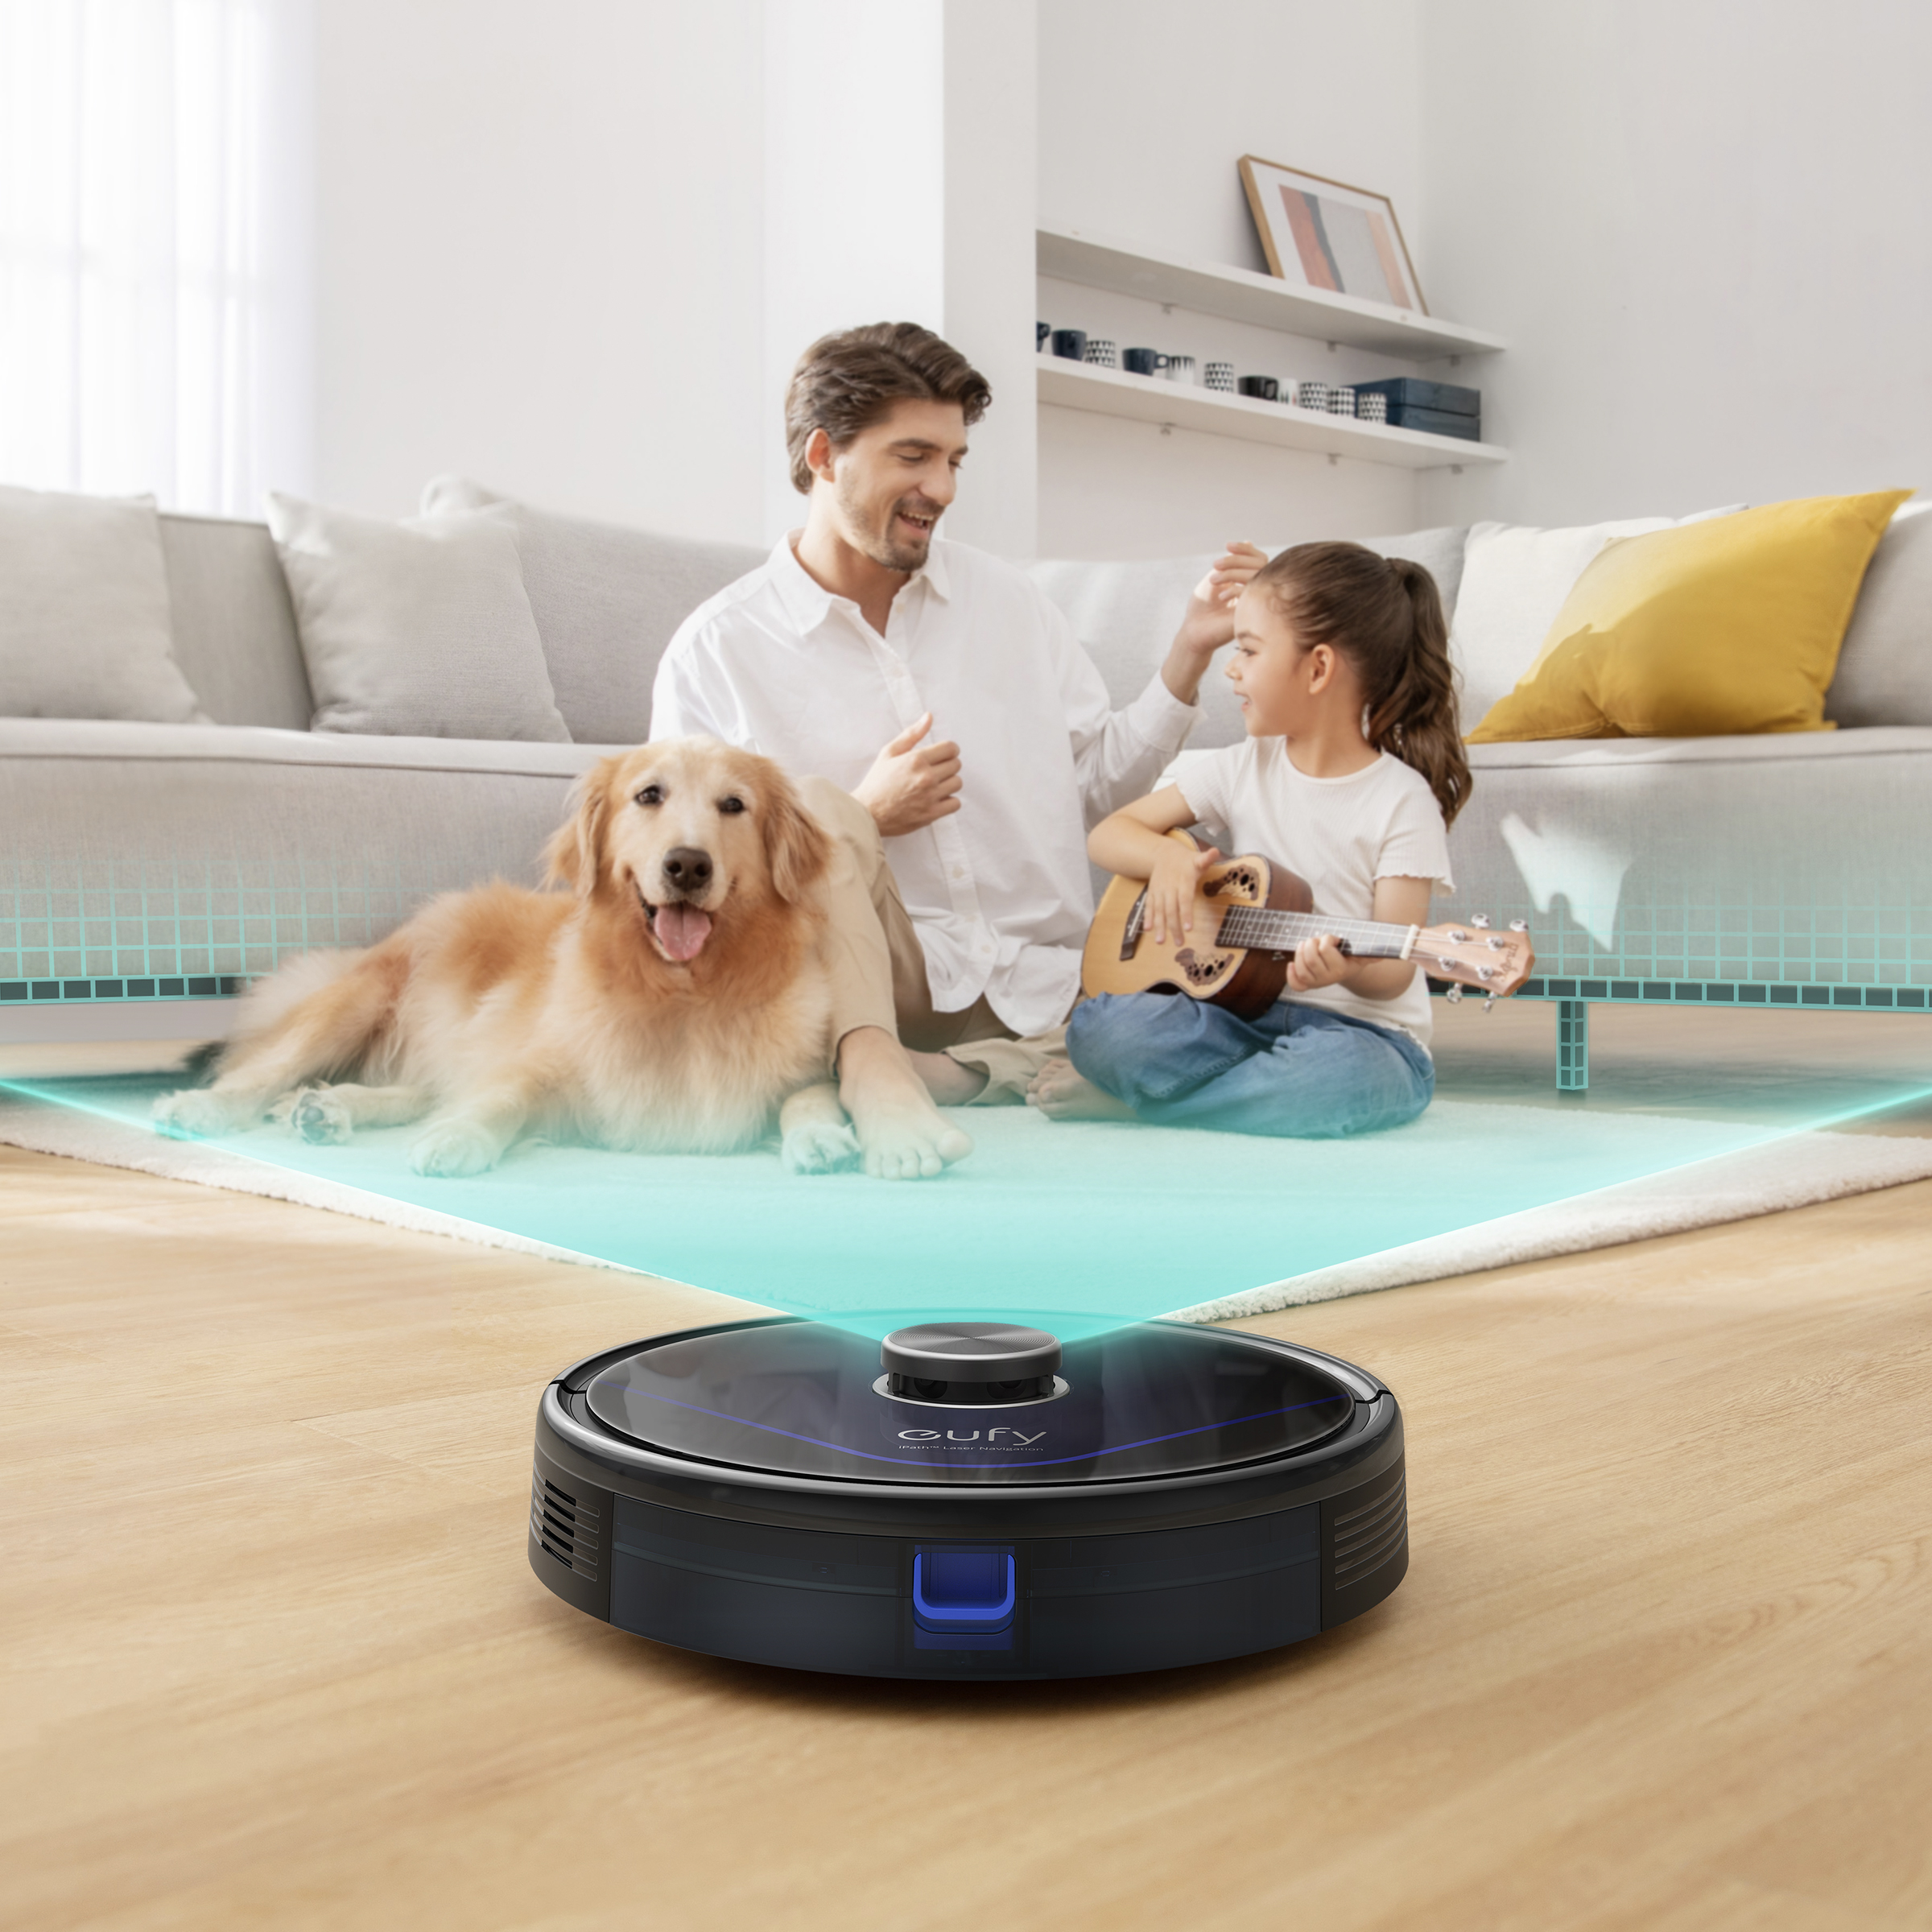 eufy LR20 Robot Vacuum, Laser Navigation for Precise Cleaning, 3000Pa Suction, T2192J11, New - image 5 of 17